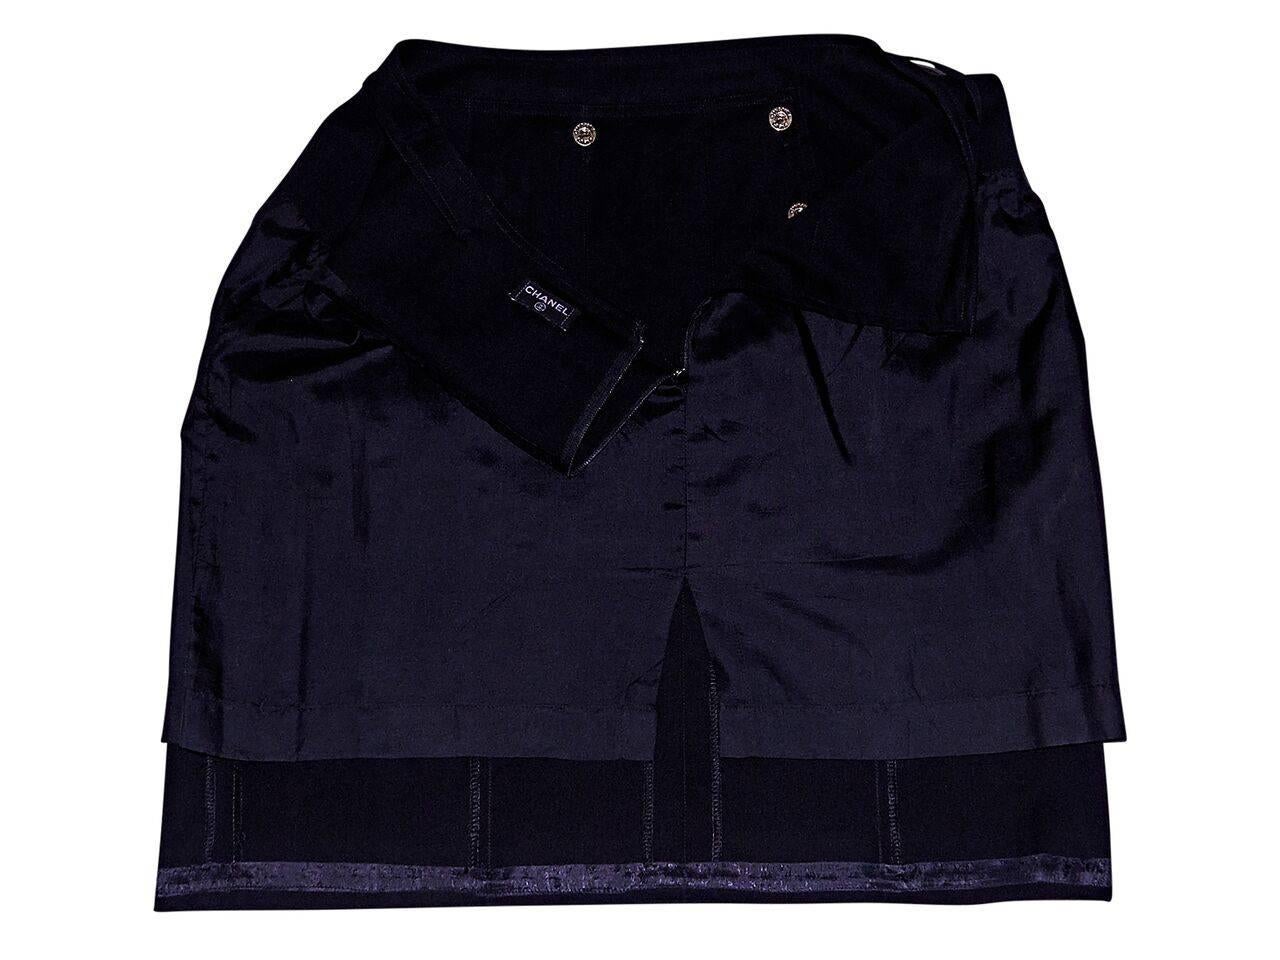 Product details:  Vintage black pleated sailor skirt by Chanel.  Button-front details.  Concealed back zip closure.  Goldtone hardware.  
Condition: Pre-owned. Very good.
Est. Retail $ 1,198.00